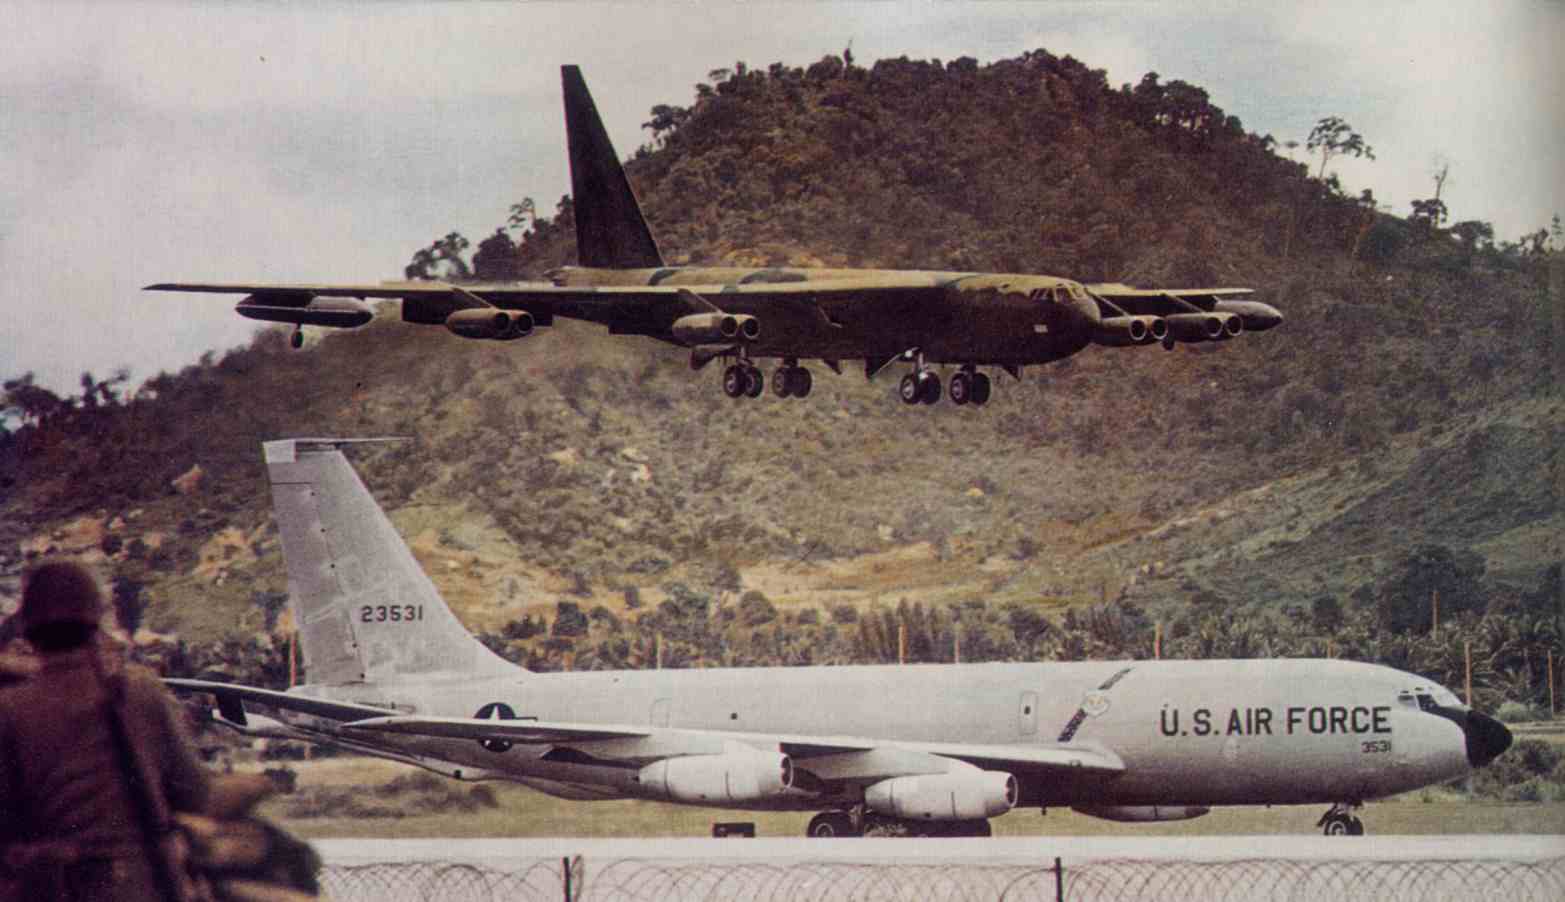 Thai Marine Guard watches B-52 land as KC-135 taxis for takeoff with Buddha Mountain in background.